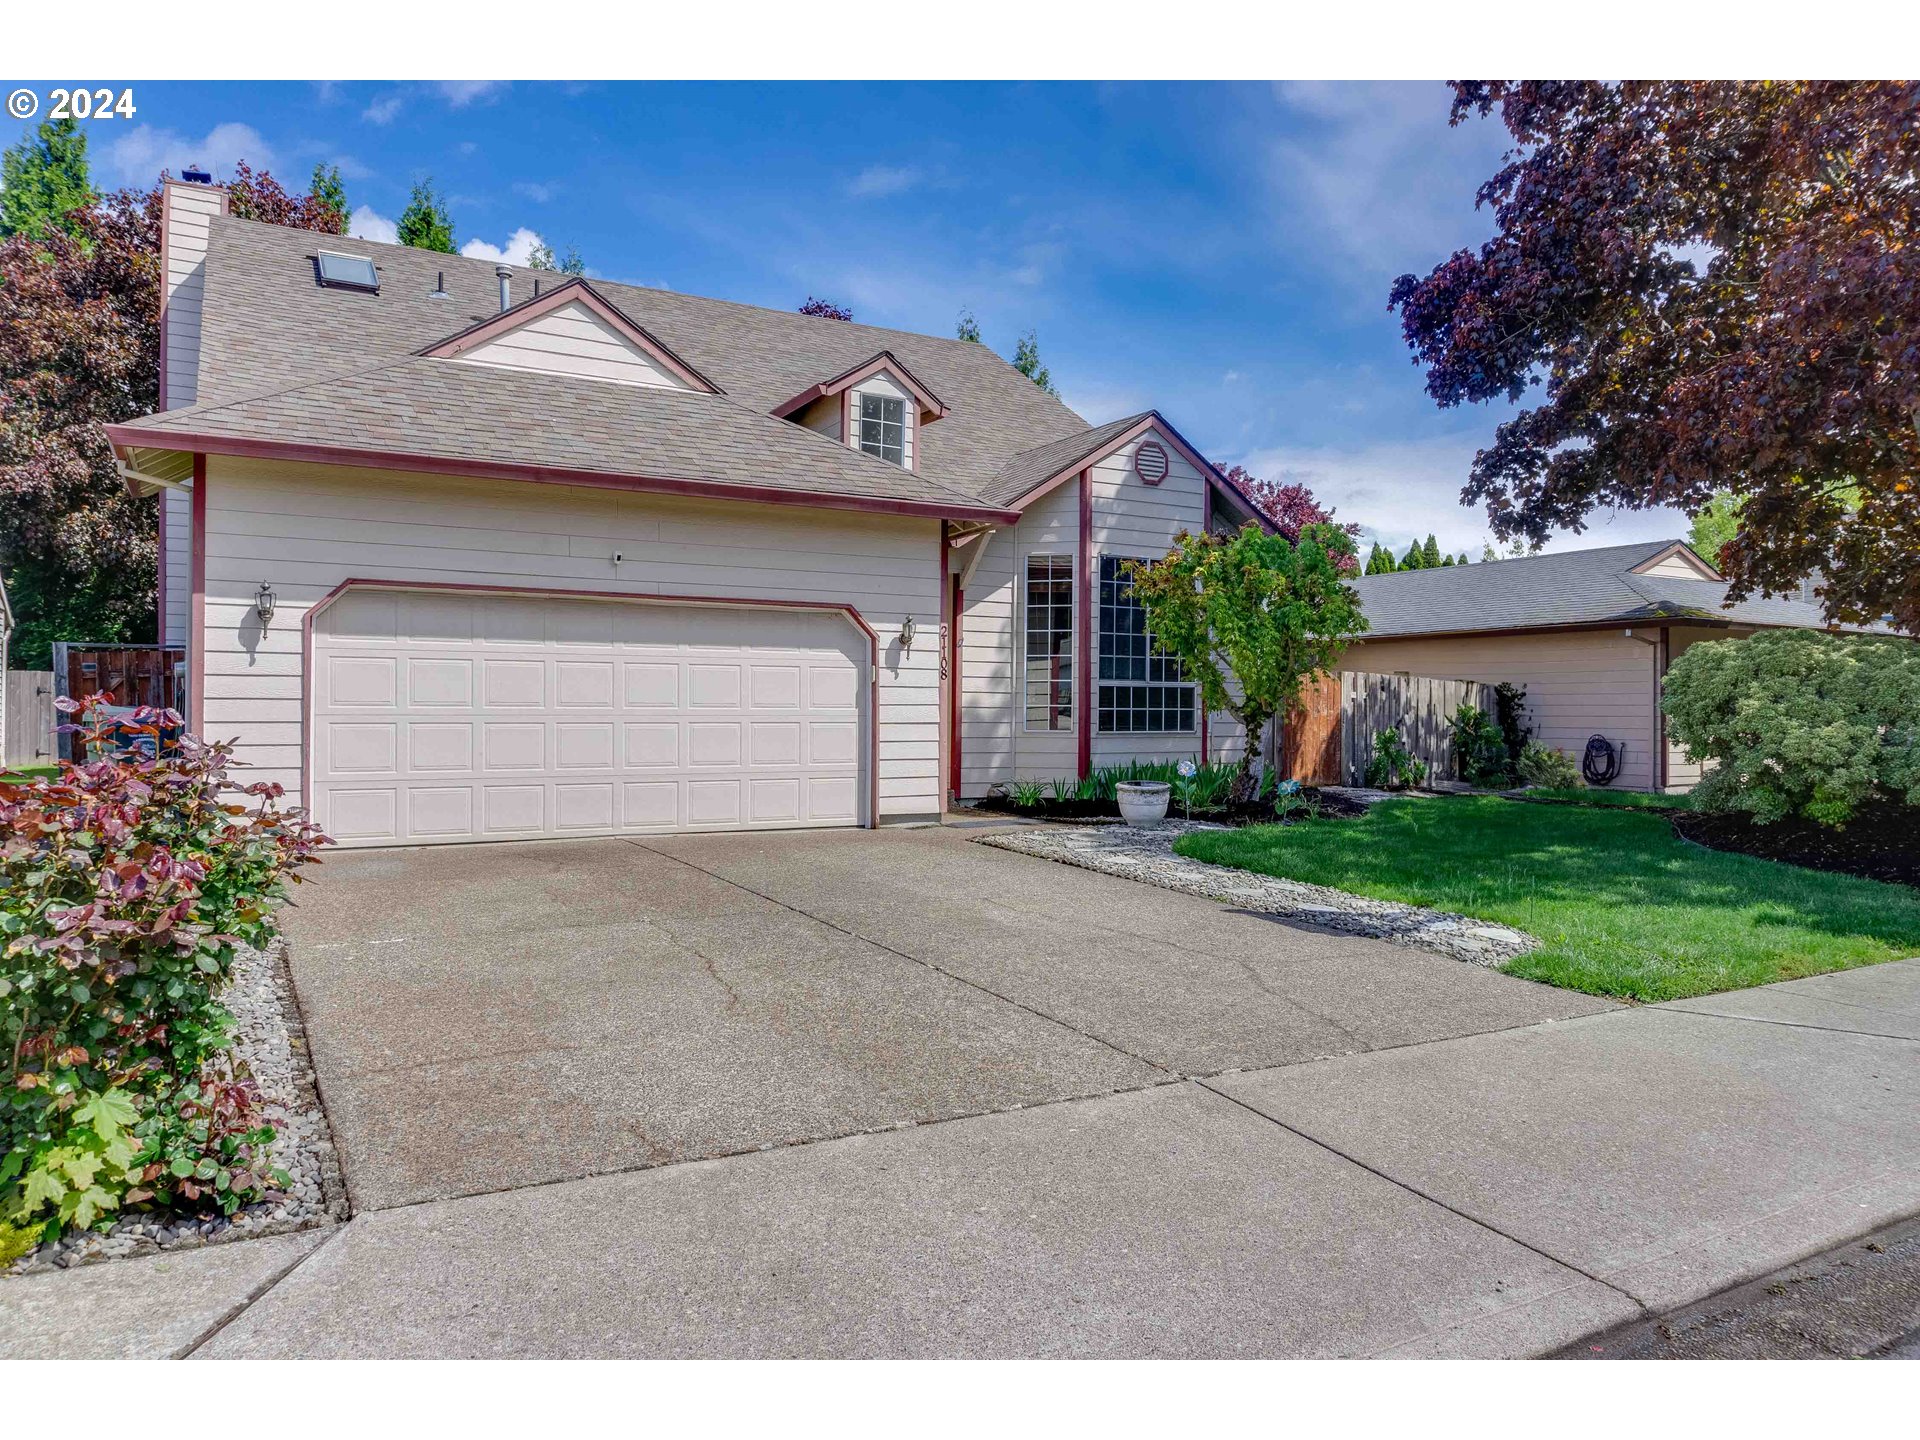 21108 NW CANNES DR, Portland OR 97229